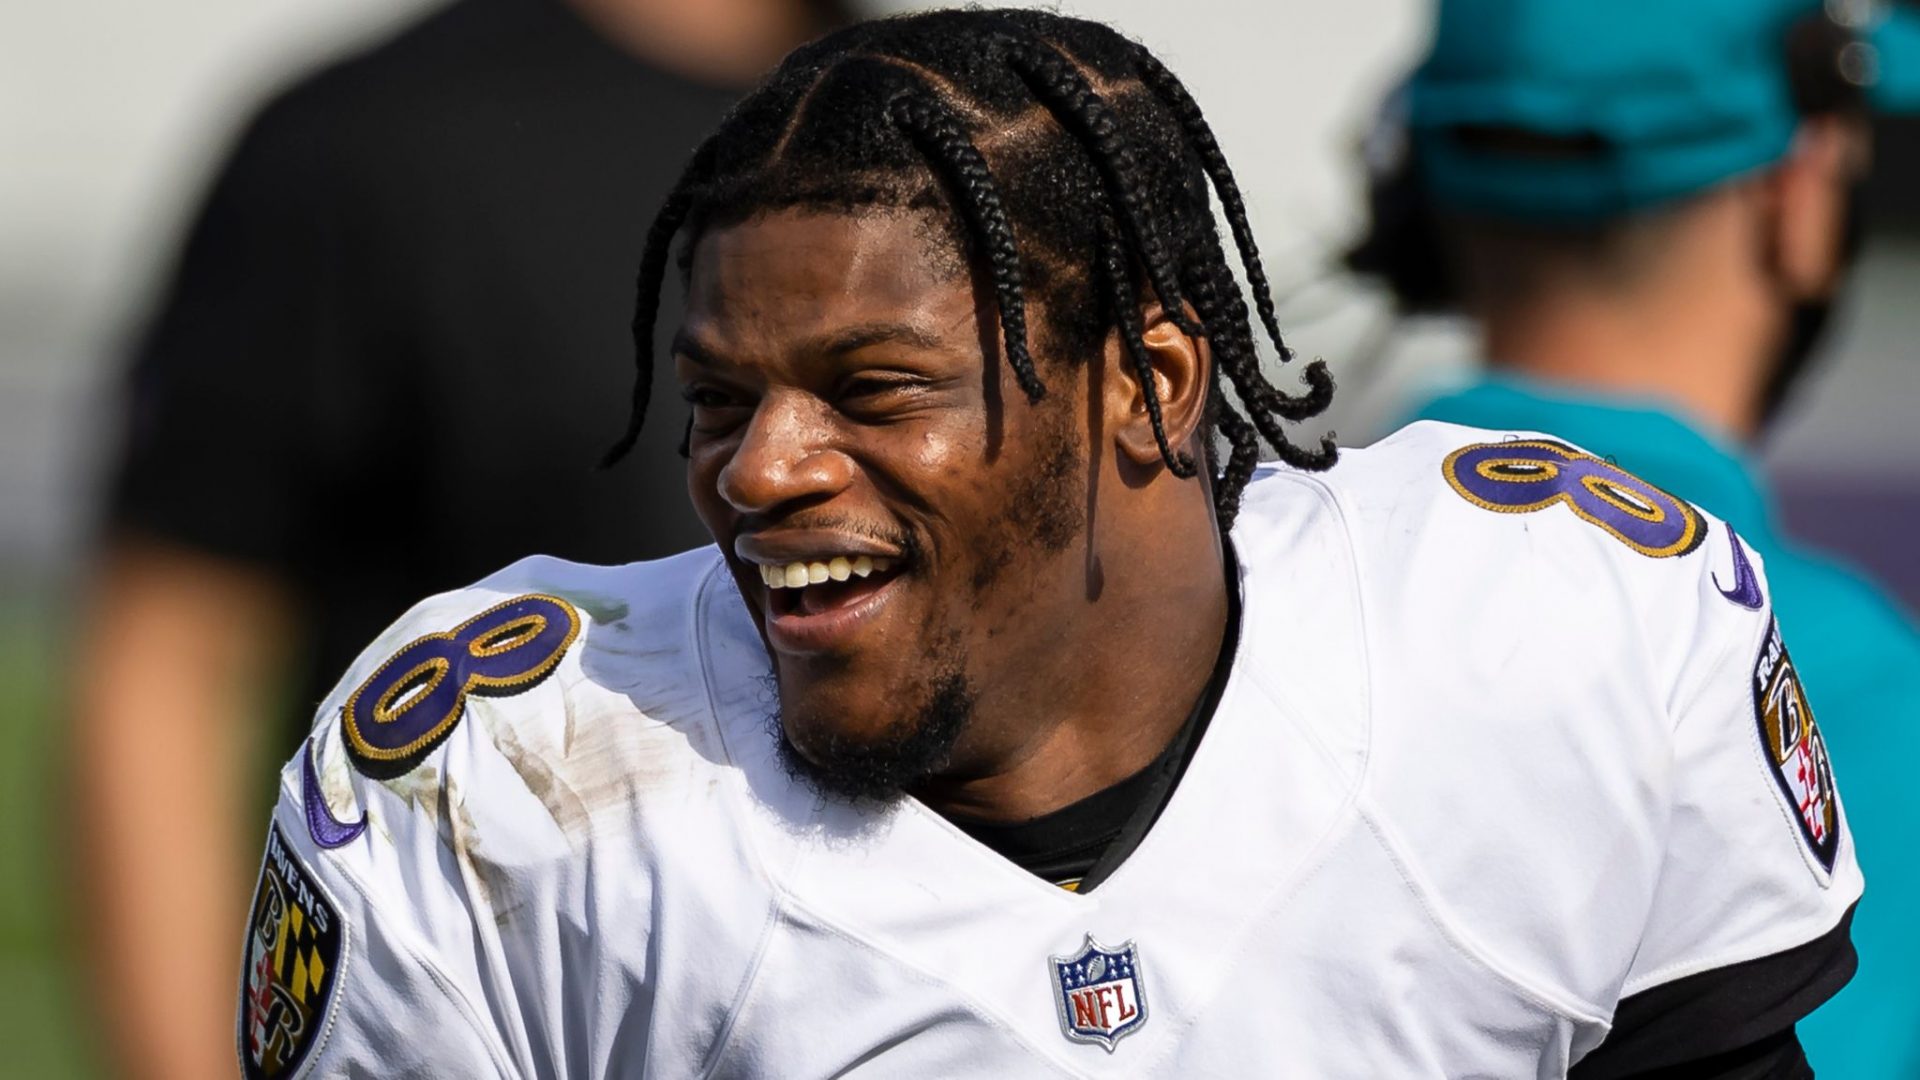 Lamar Jackson Net Worth (2020), Height, Age, Bio and Facts